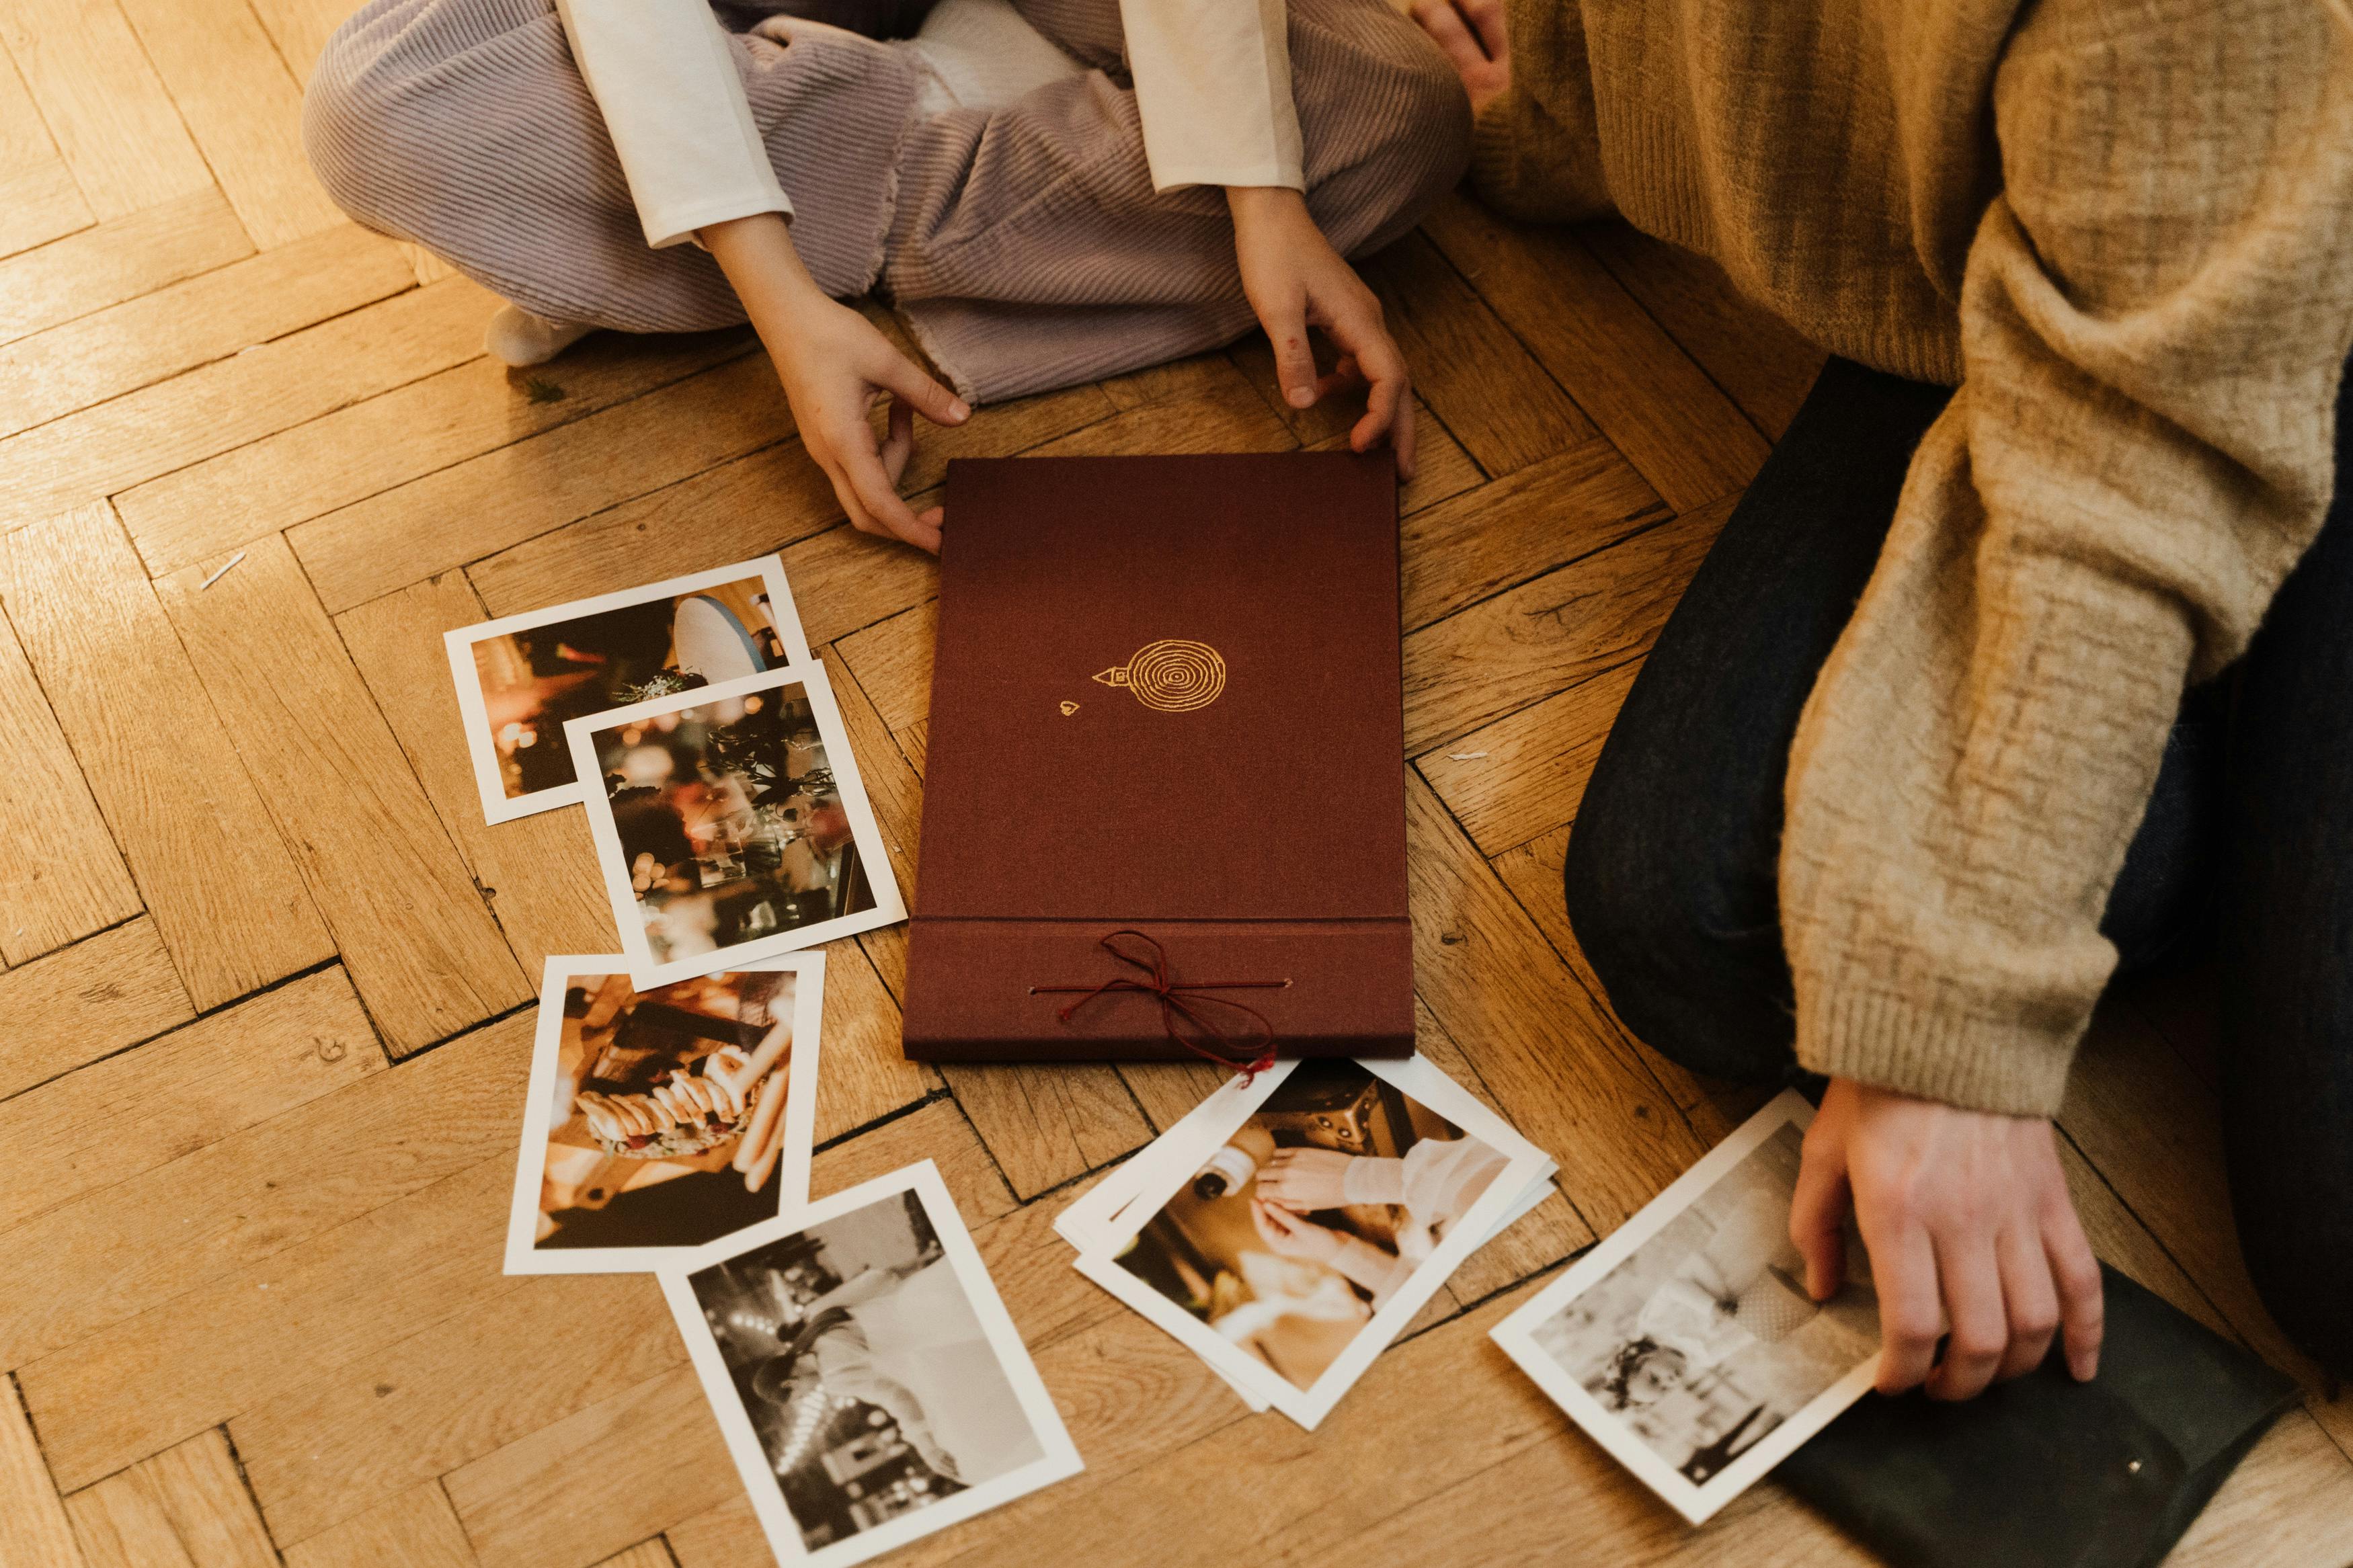 A couple sorting out family photos | Source: Pexels